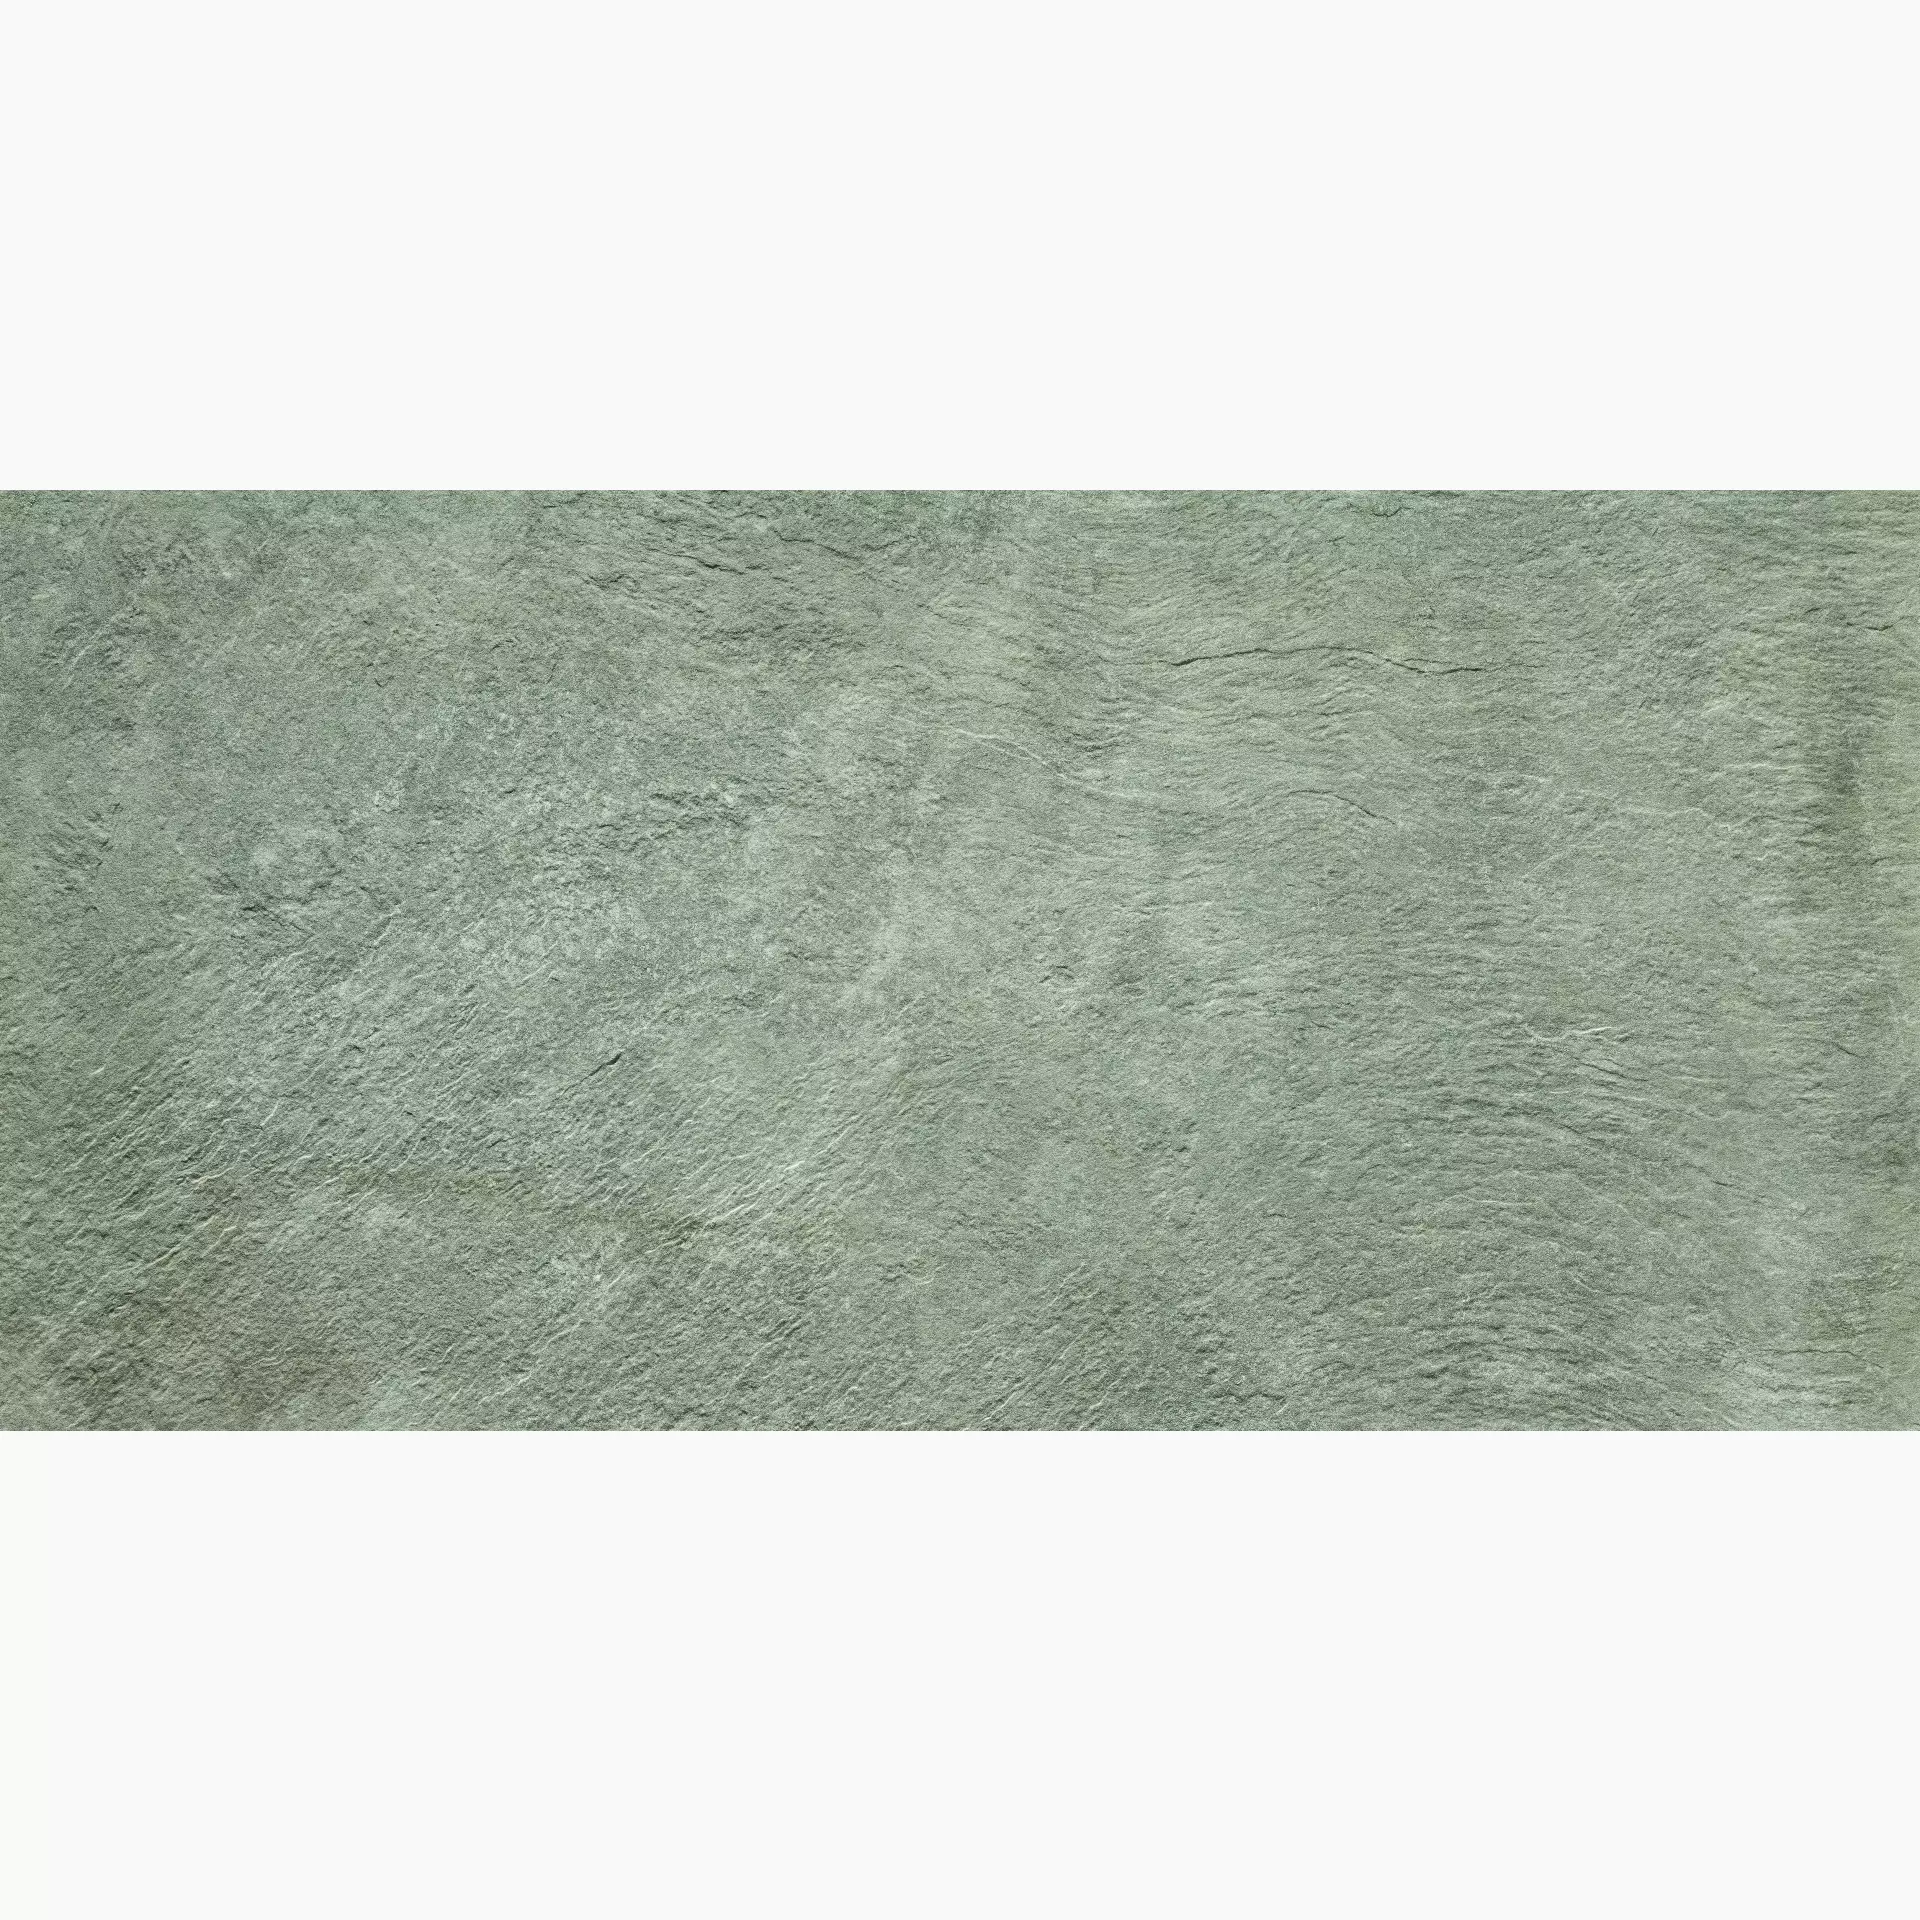 Cercom Absolute Grey Naturale 1076227 60x120cm rectified 9,5mm